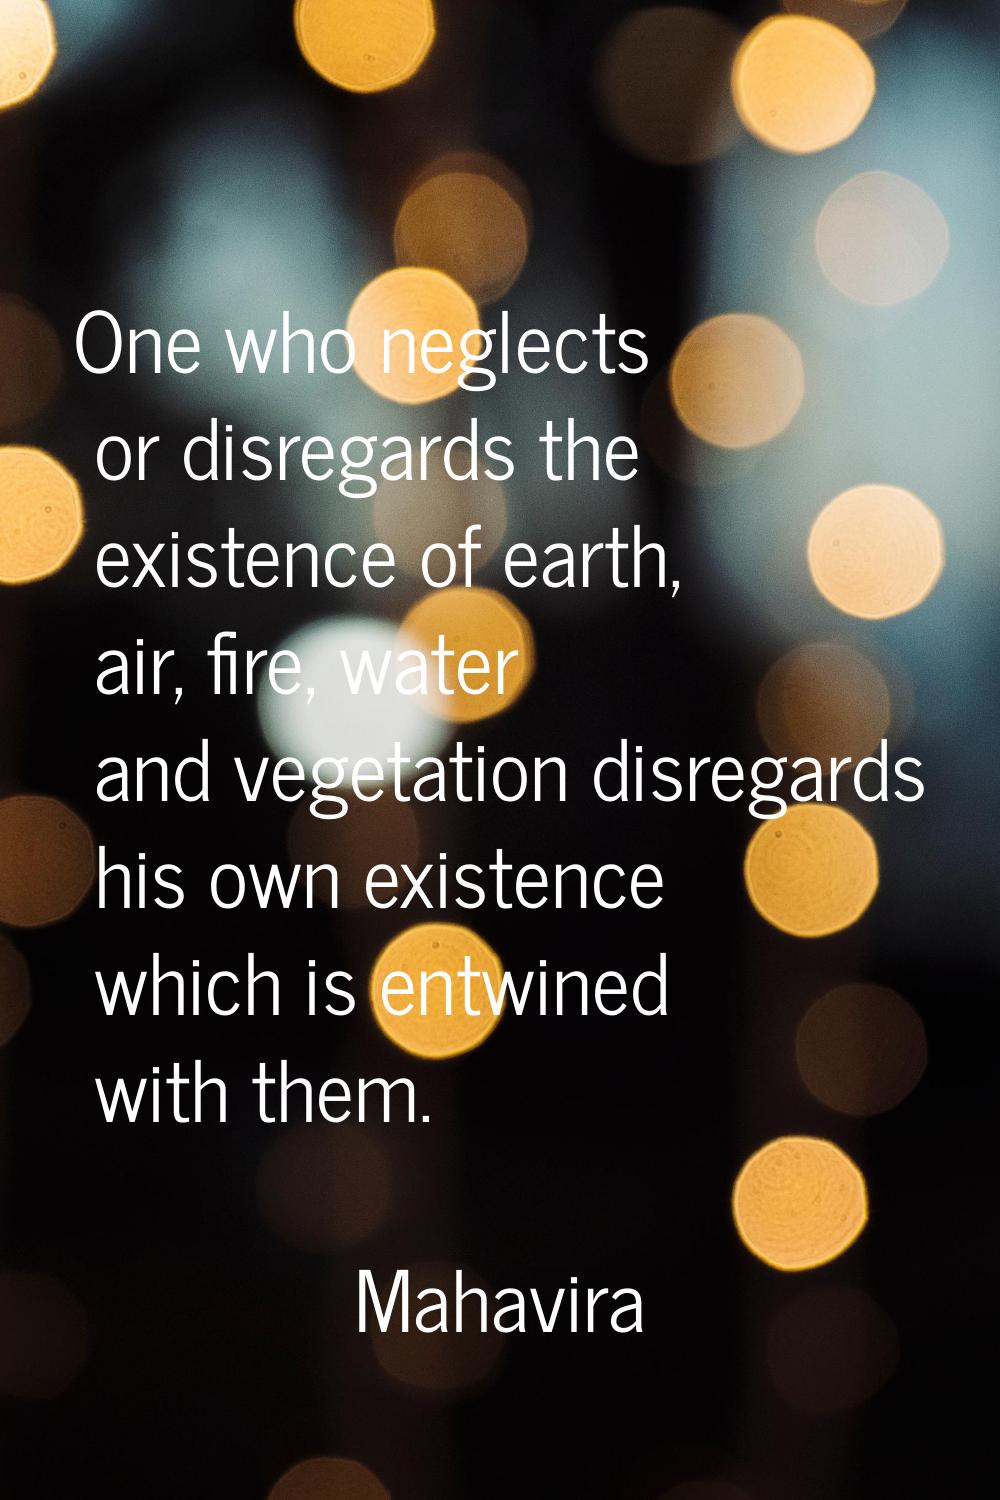 One who neglects or disregards the existence of earth, air, fire, water and vegetation disregards h